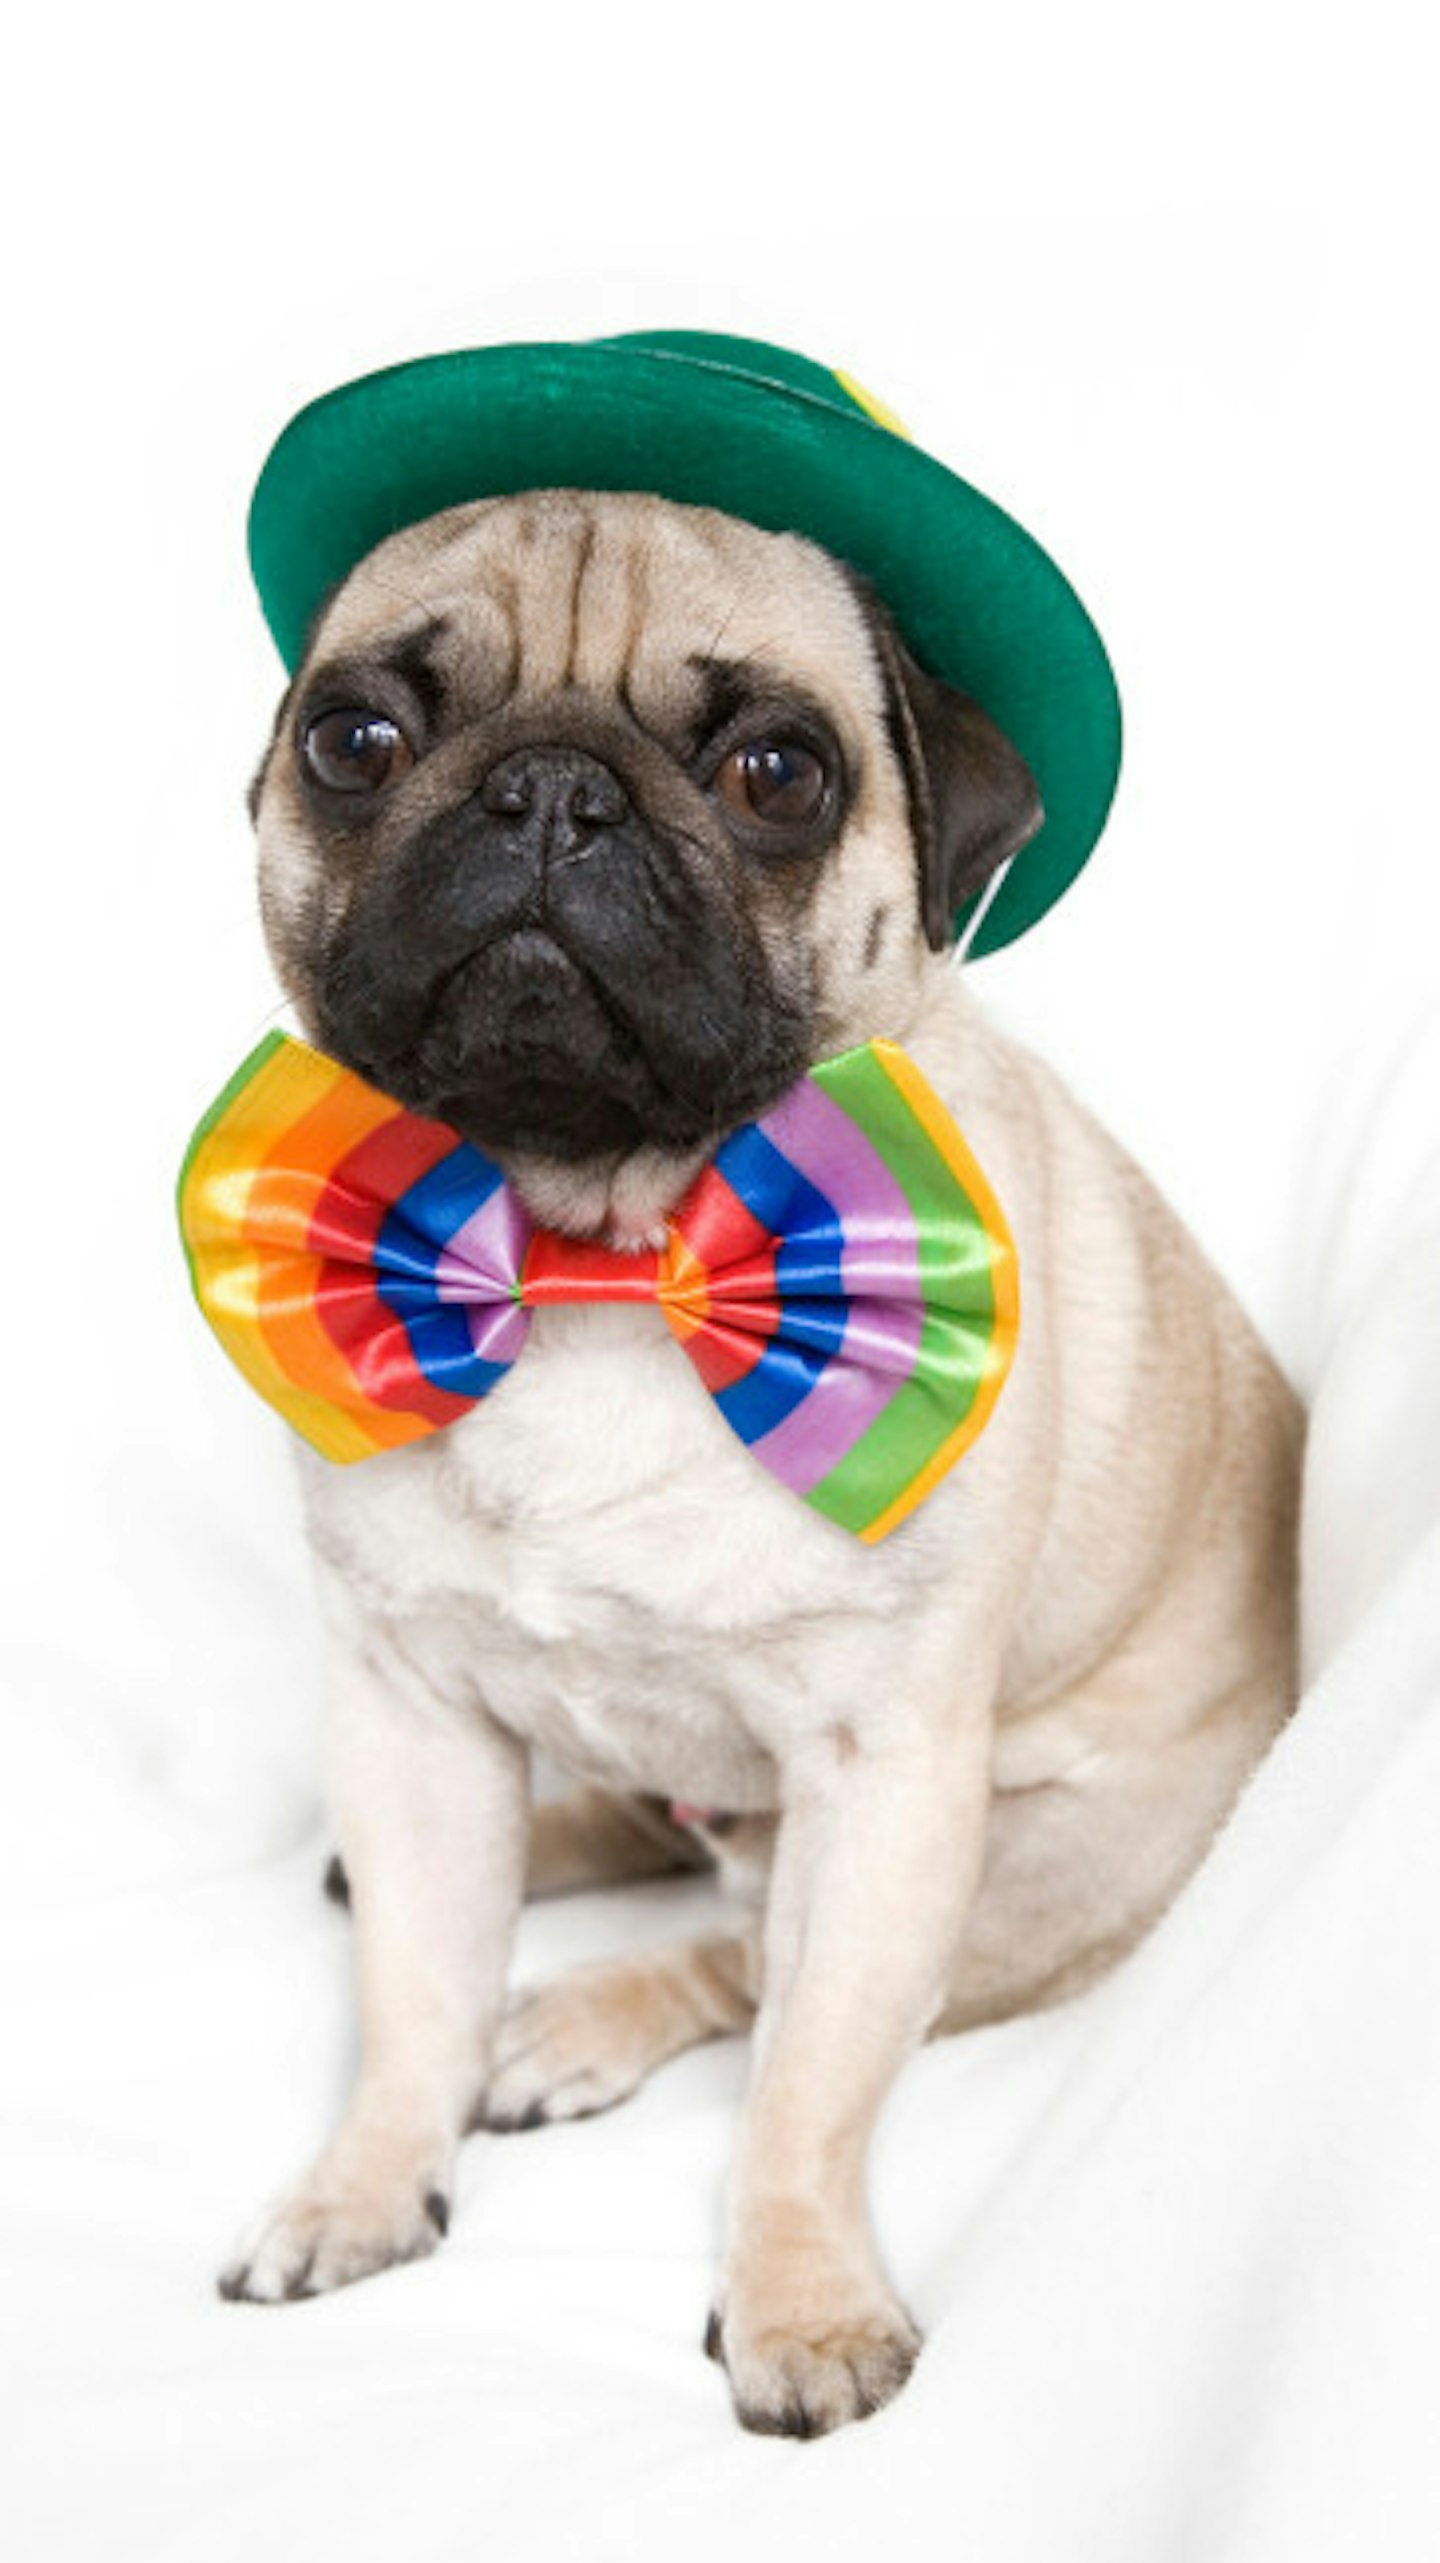 pug in a hat